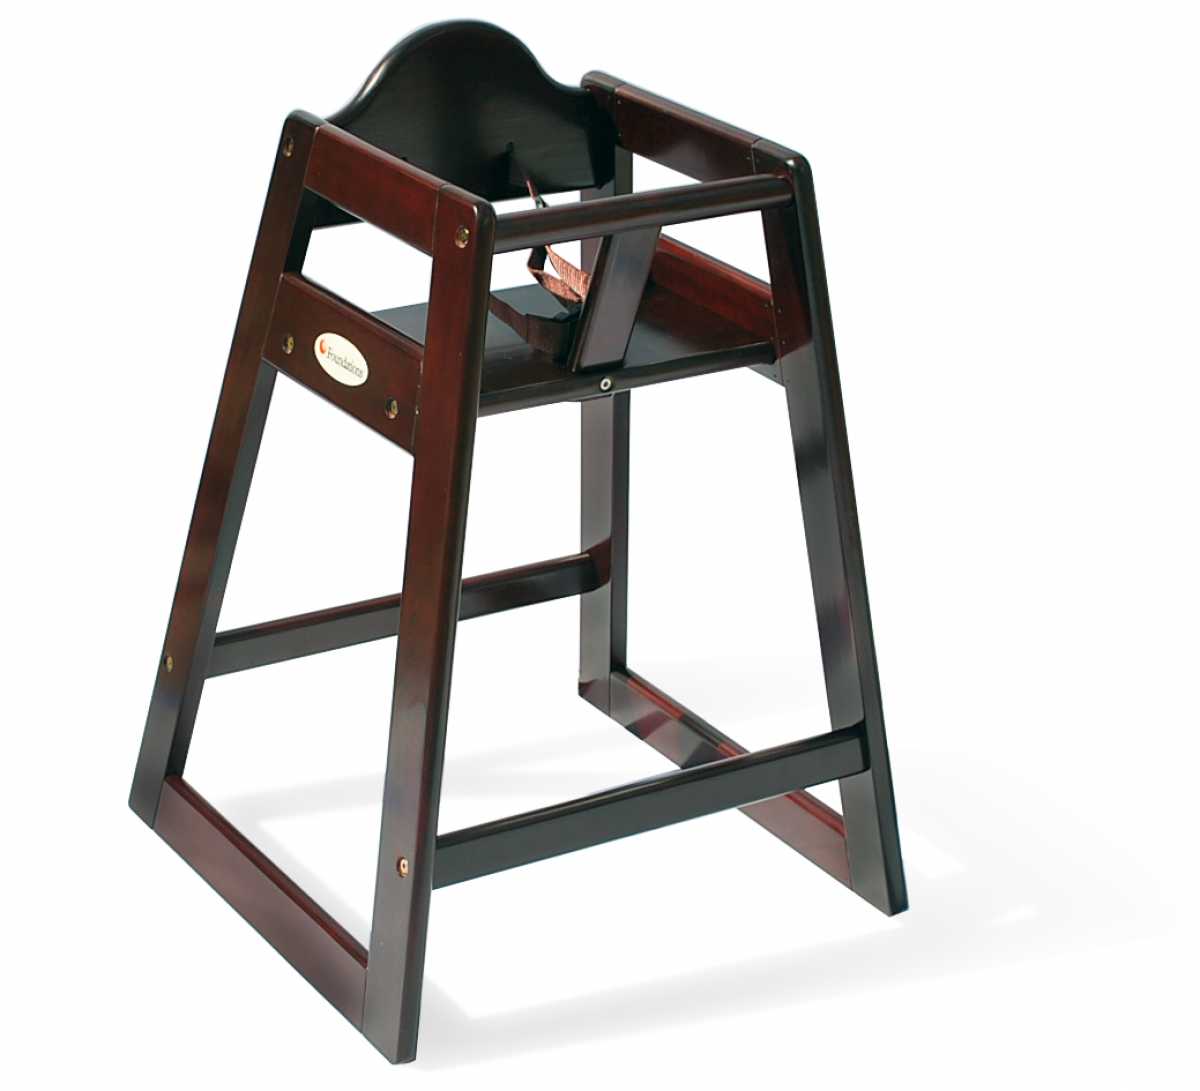 FOUNDATIONS Hardwood High Chair, Antique Cherry